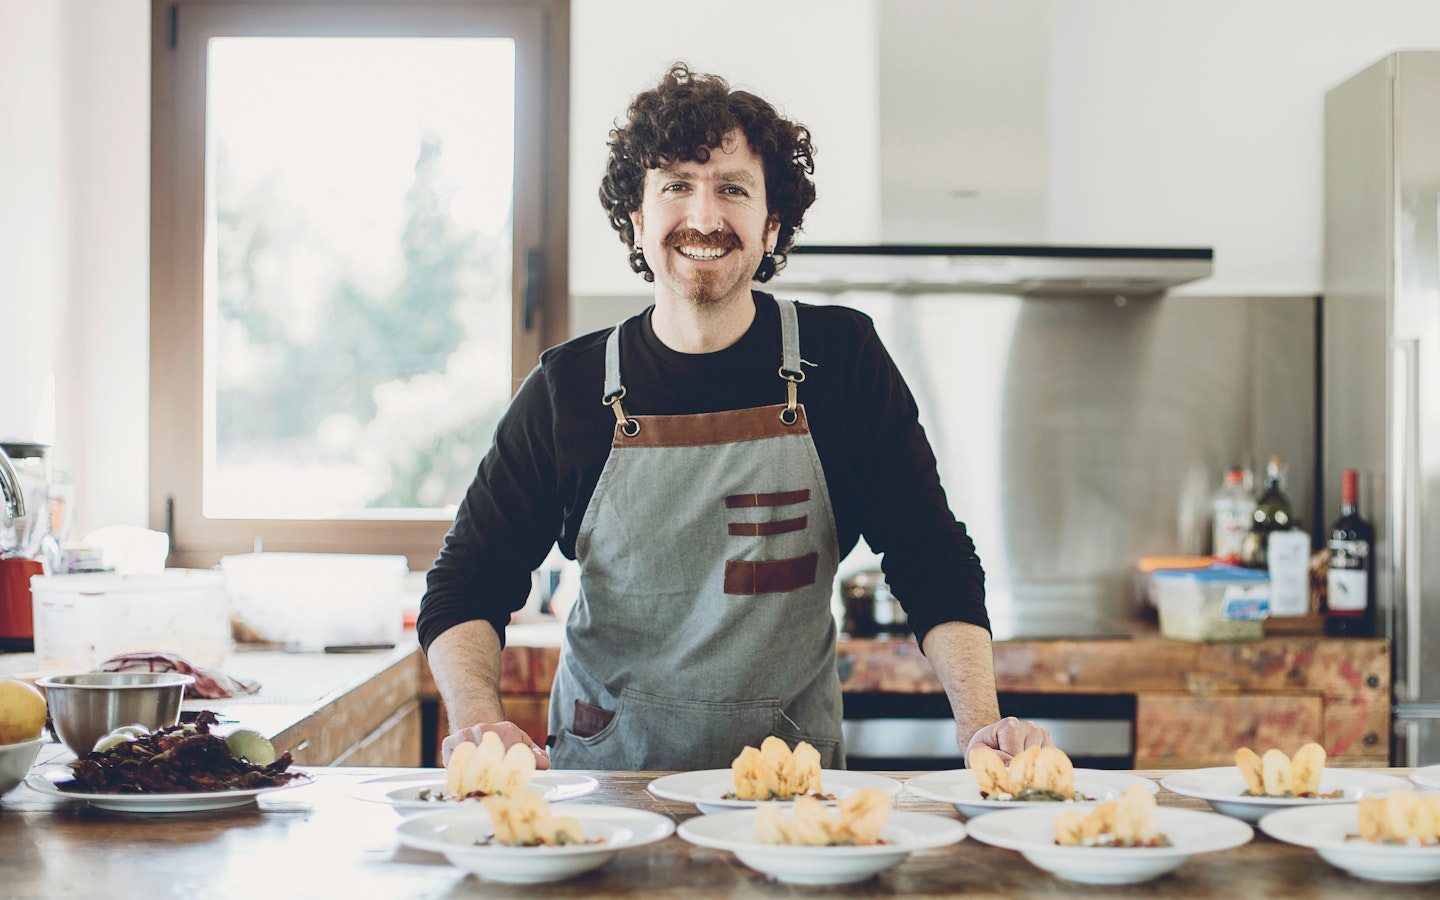 Learn culinary techniques from master chef Benji in Majorca, Spain.